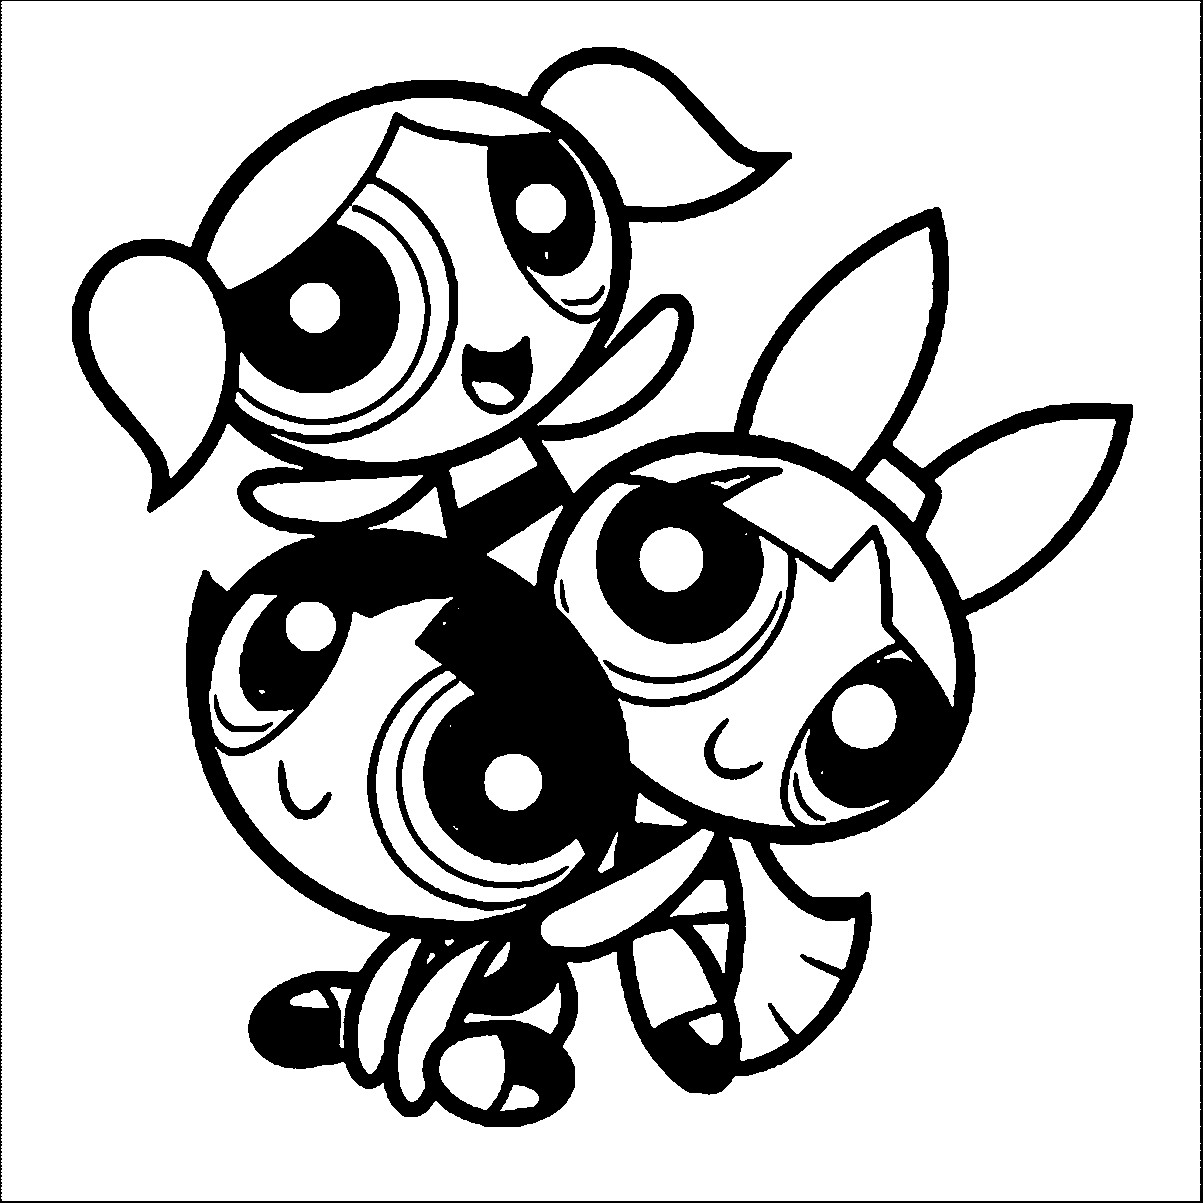 Powerpunk Coloring Sheets For Kids
 Odd Powerpuff Girls Printables Coloring Pages And Crafty 5036